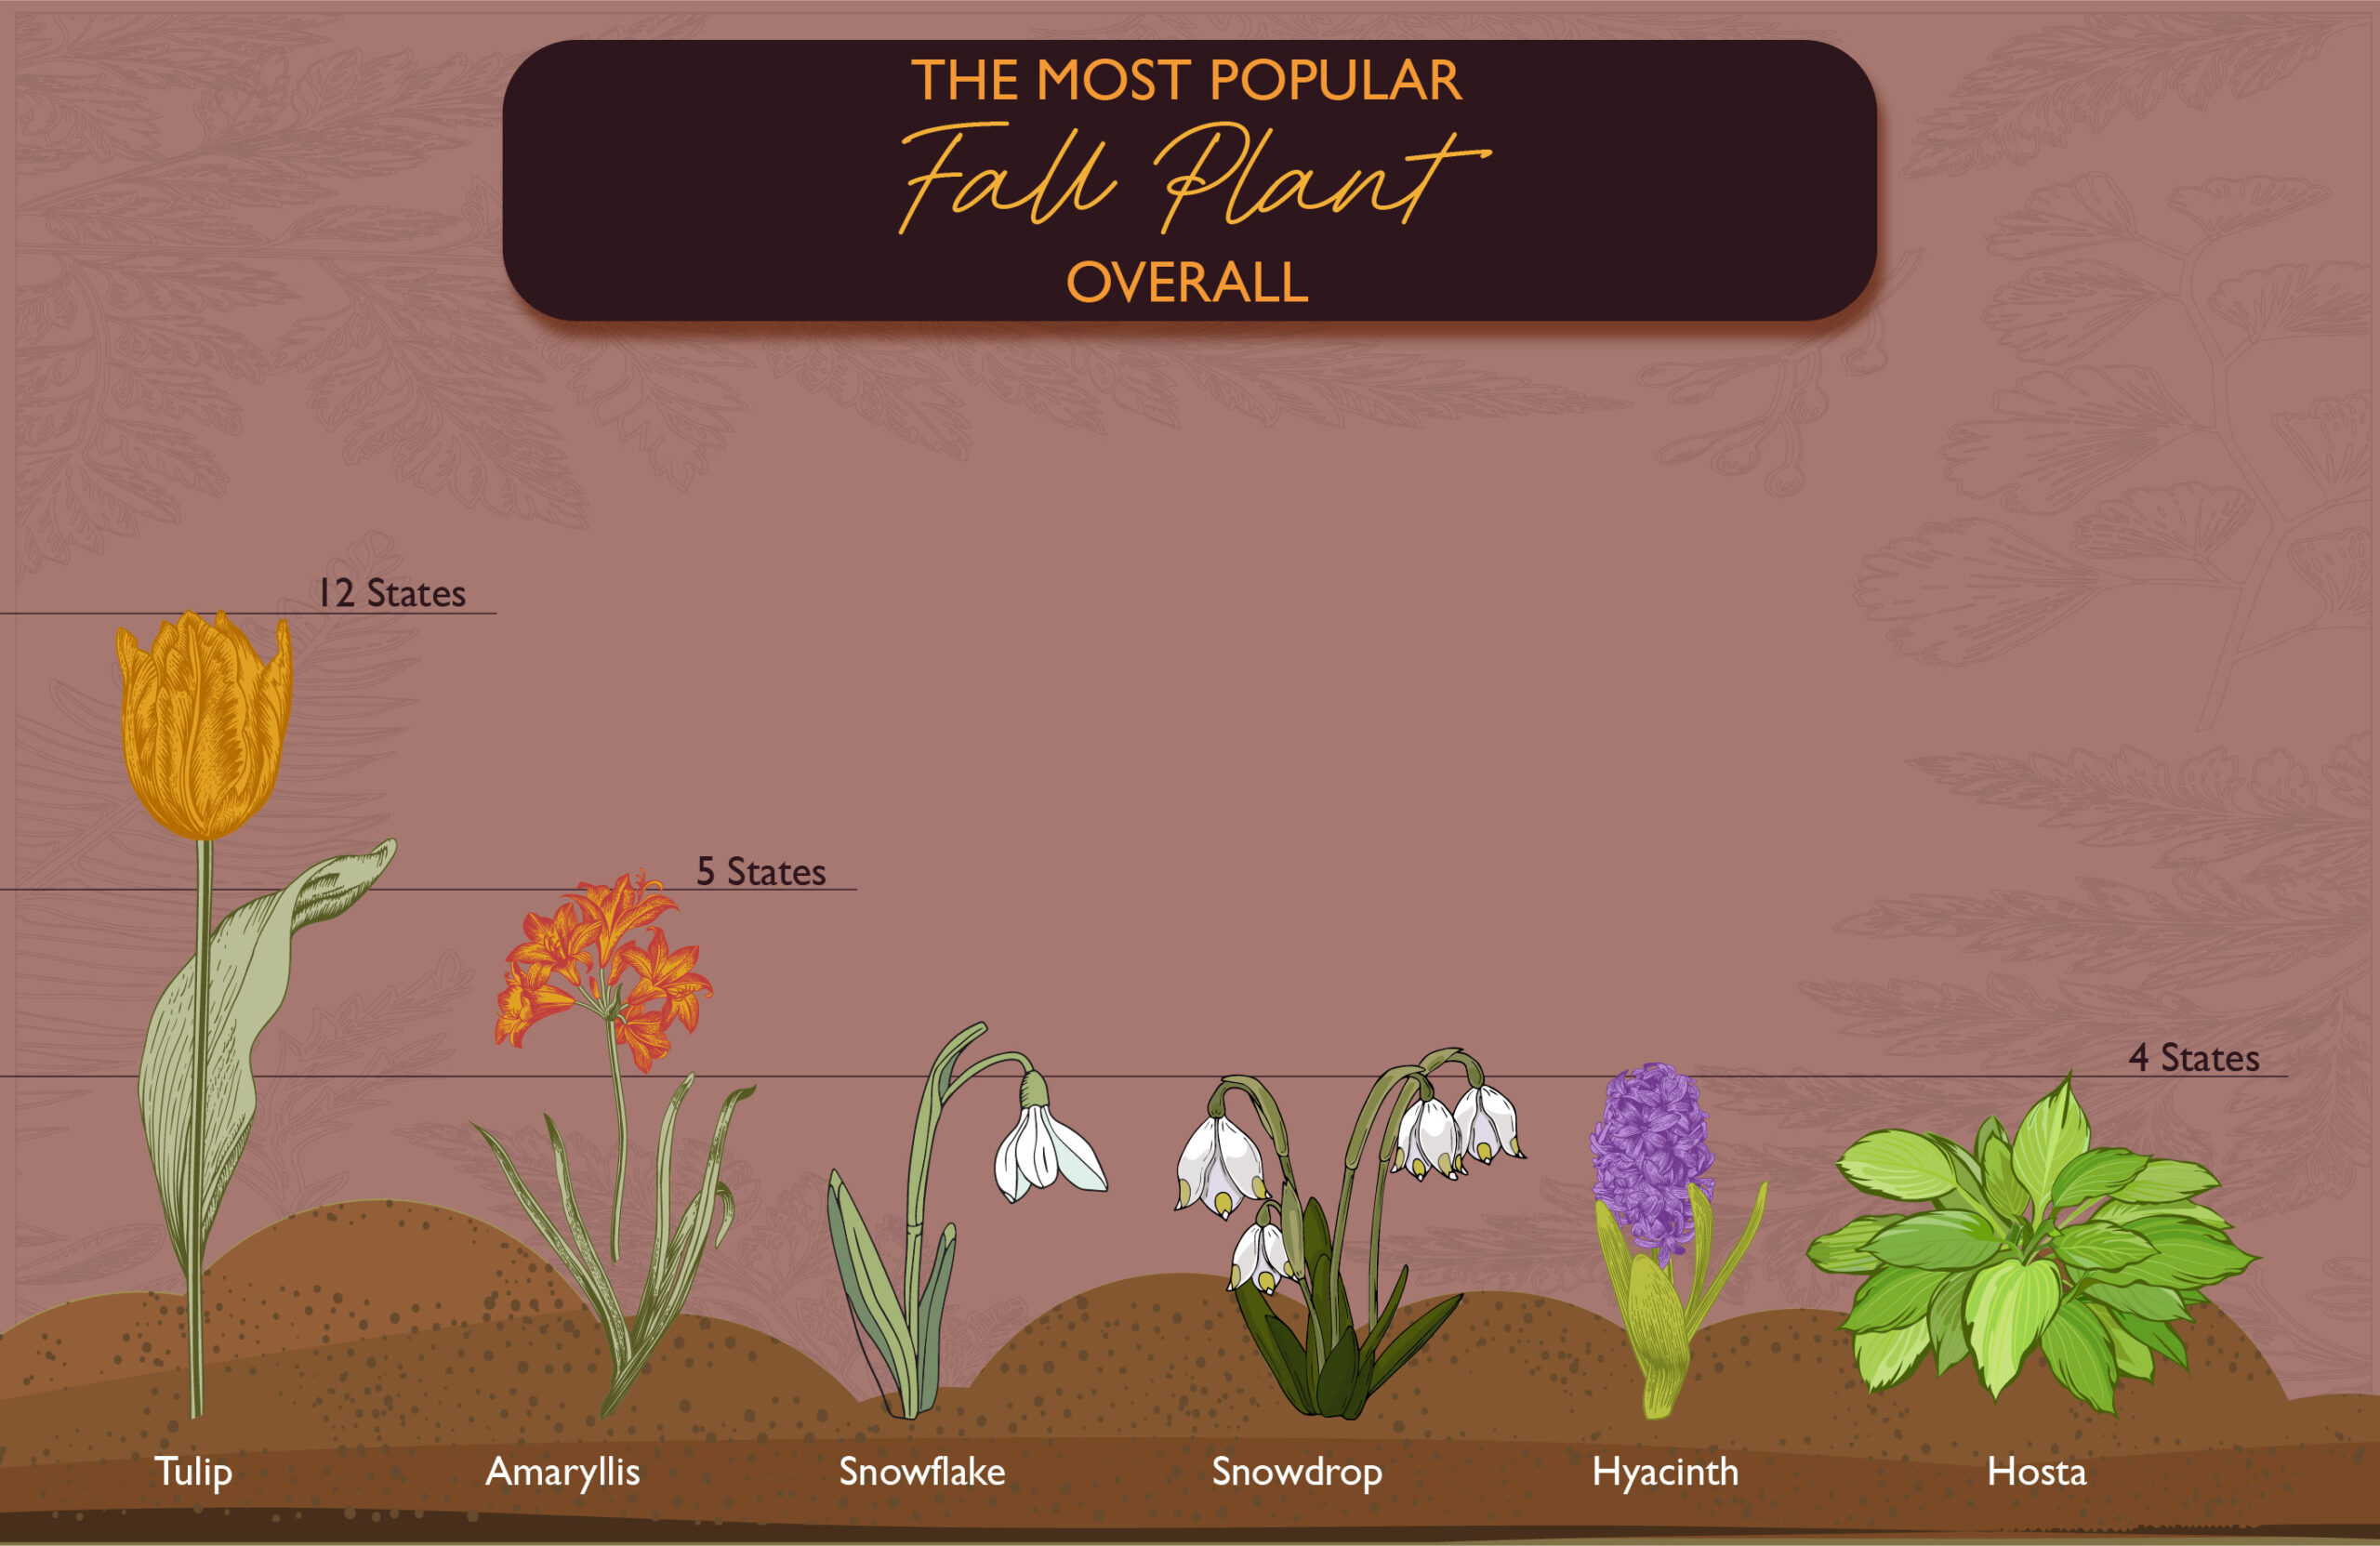  A graphic of the most popular fall plant overall